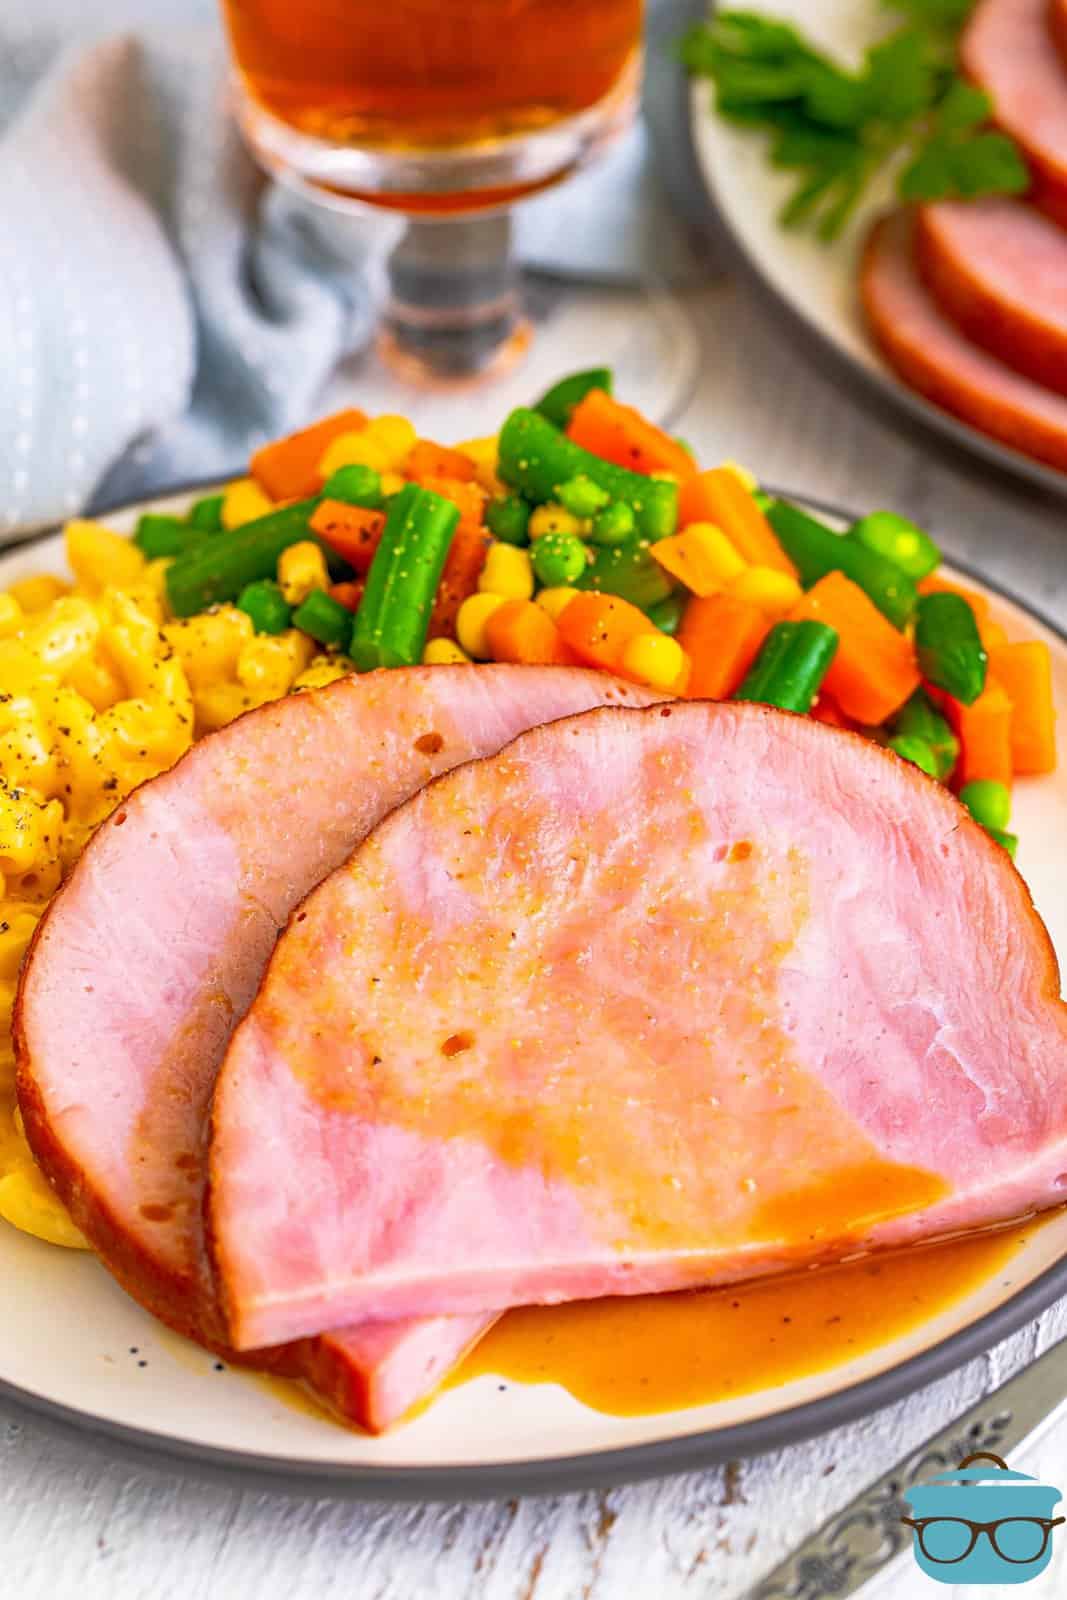 Slow Cooker Boneless Ham slices on plate with sides.